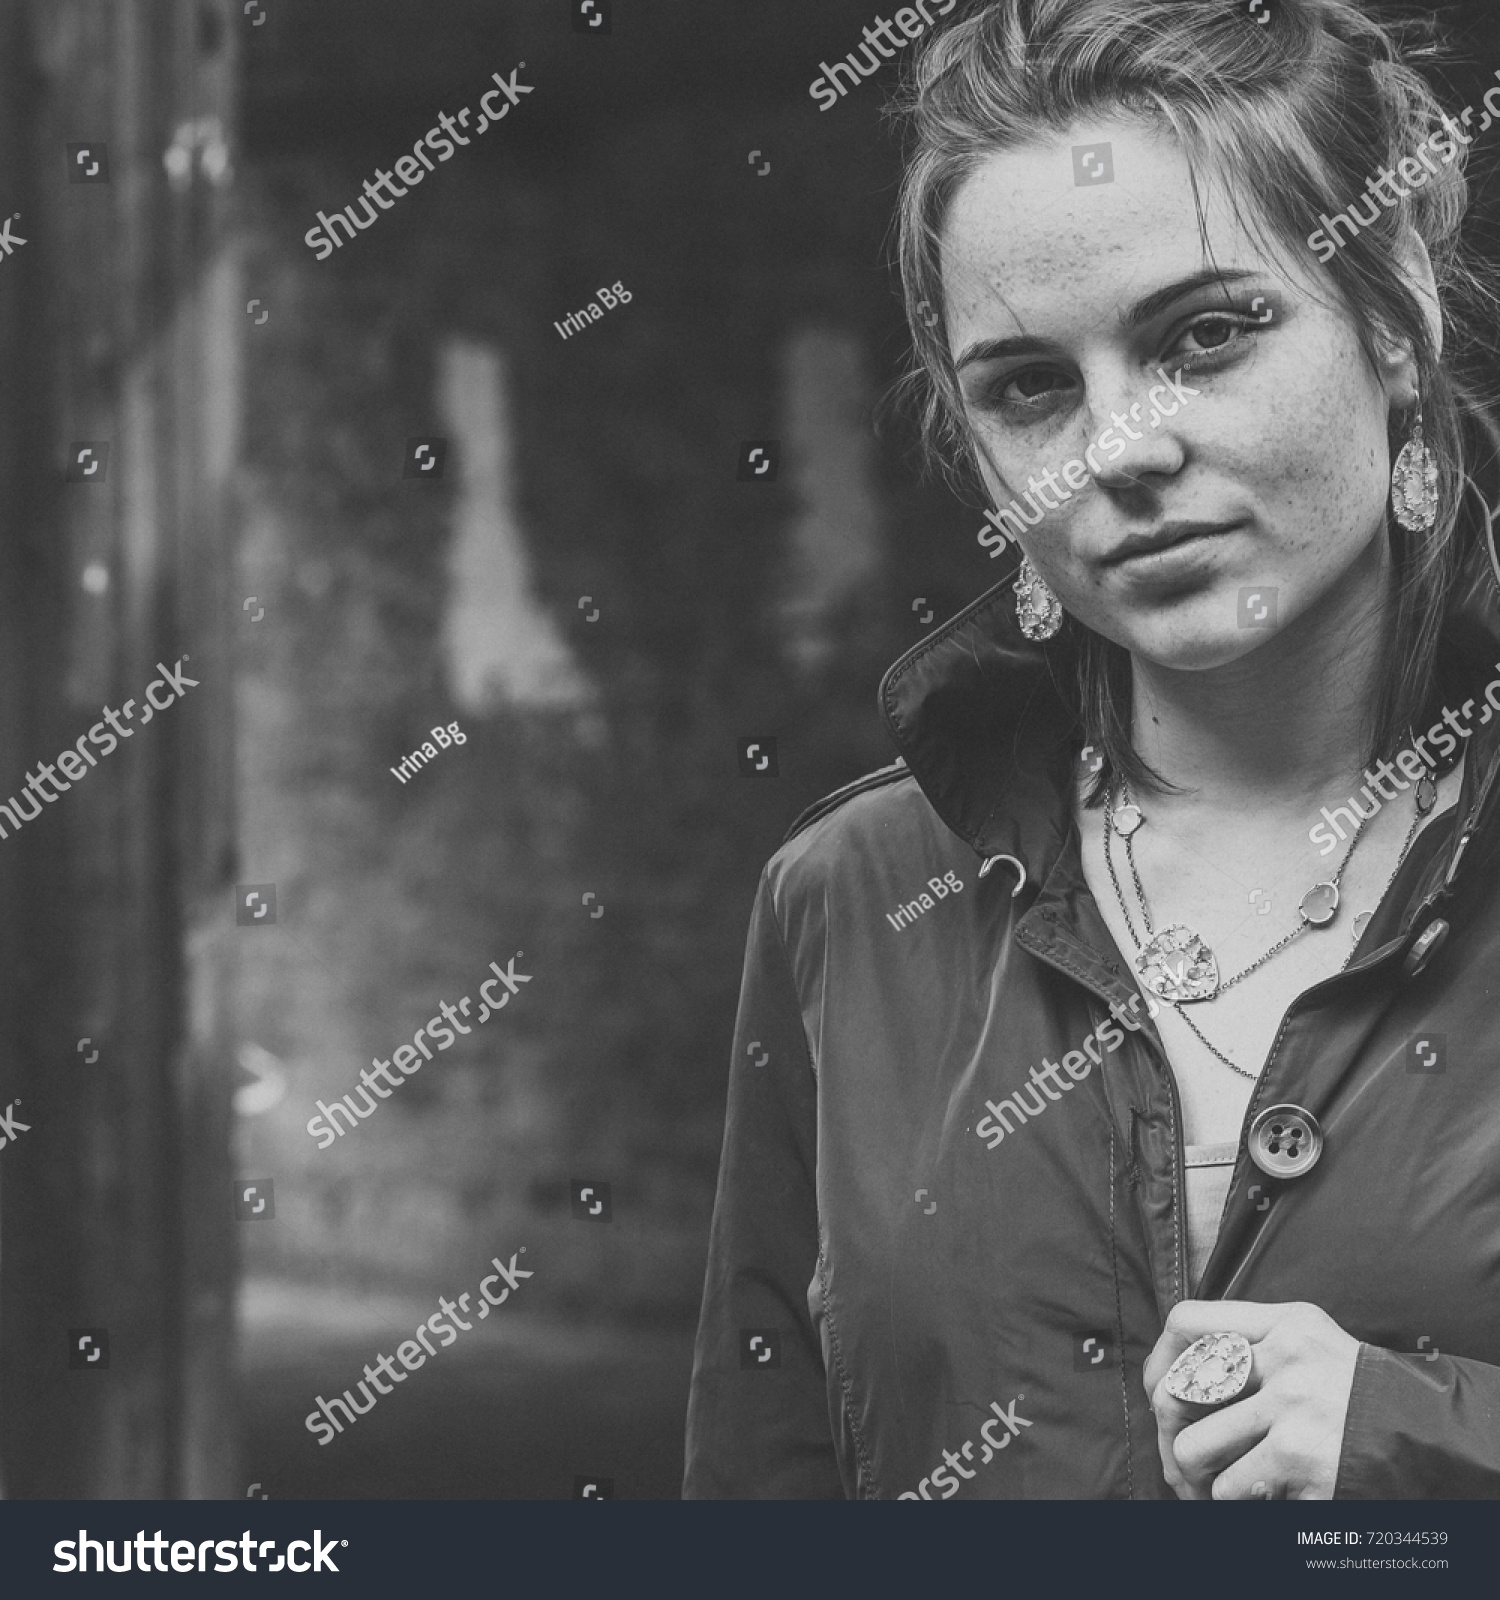 Arctic byrde Justering Beautiful Woman Face Portrait Freckles Street Stock Photo (Edit Now)  720344539